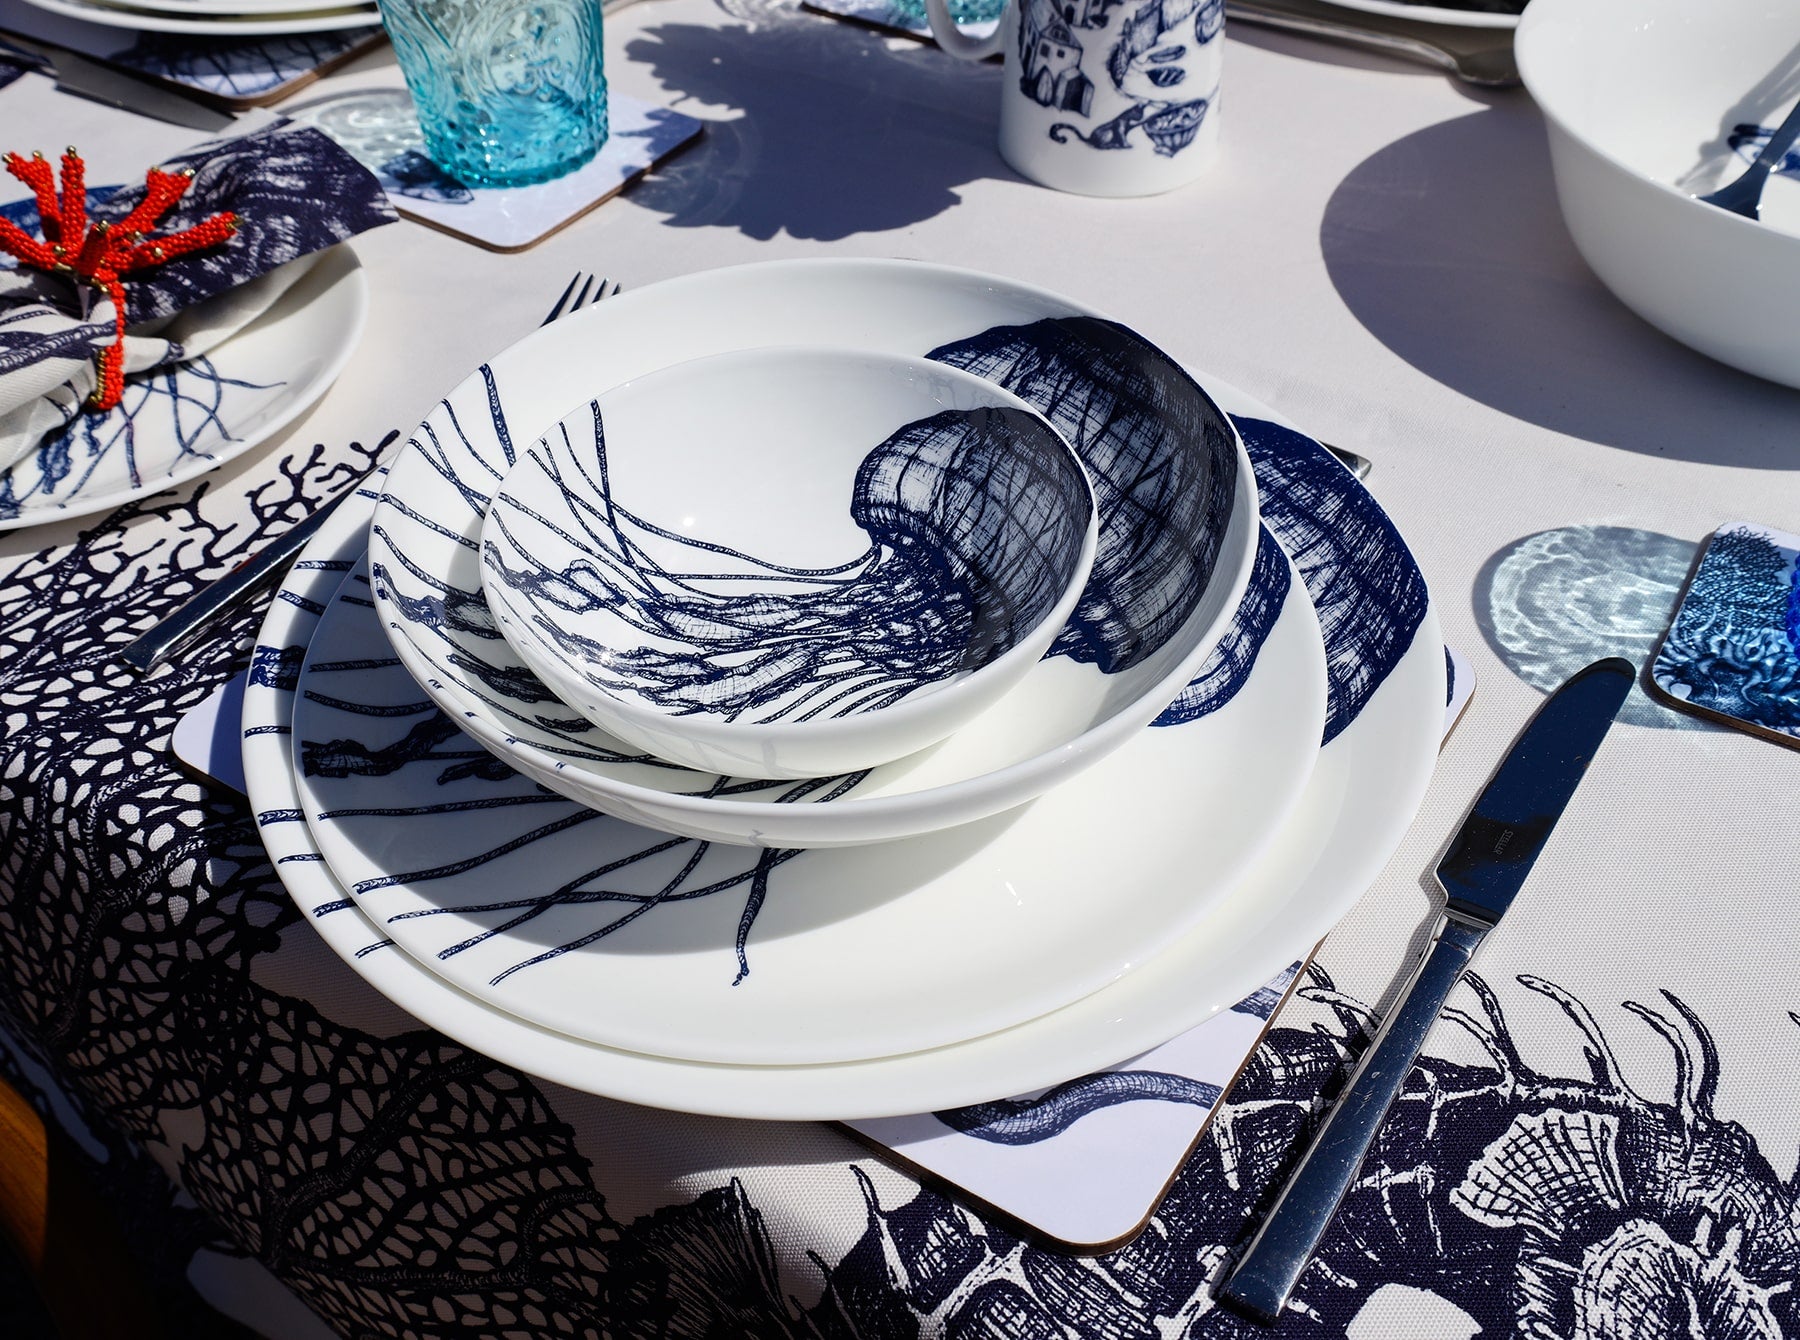 Outside Table setting with Large Jellyfish plates,stacked with the bowls on a placemat,next to a coaster with a blue glass.